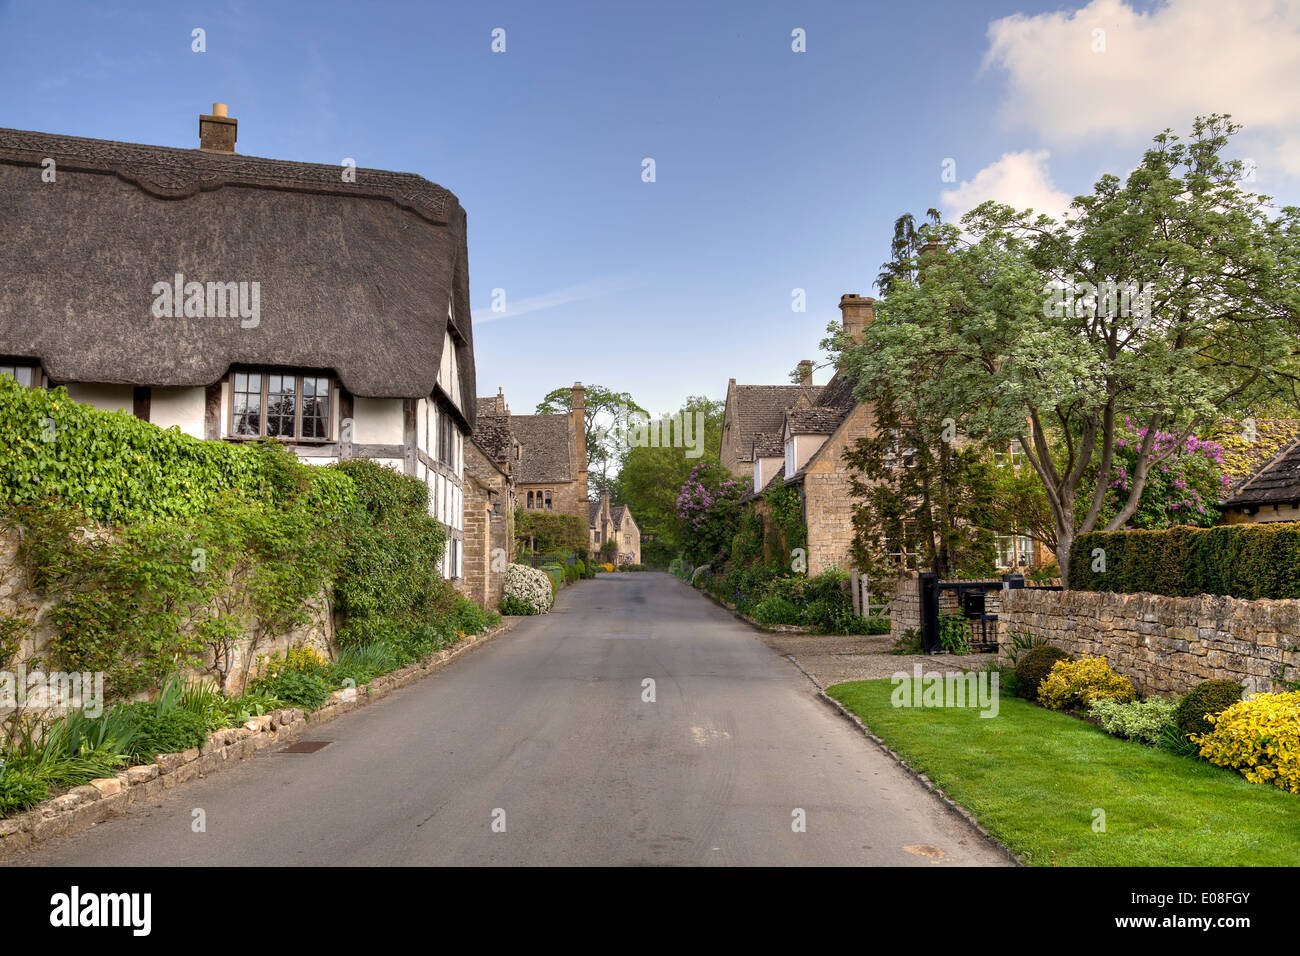 Cotswold cottages in the Gloucestershire village of Stanton, England. Stock Photo